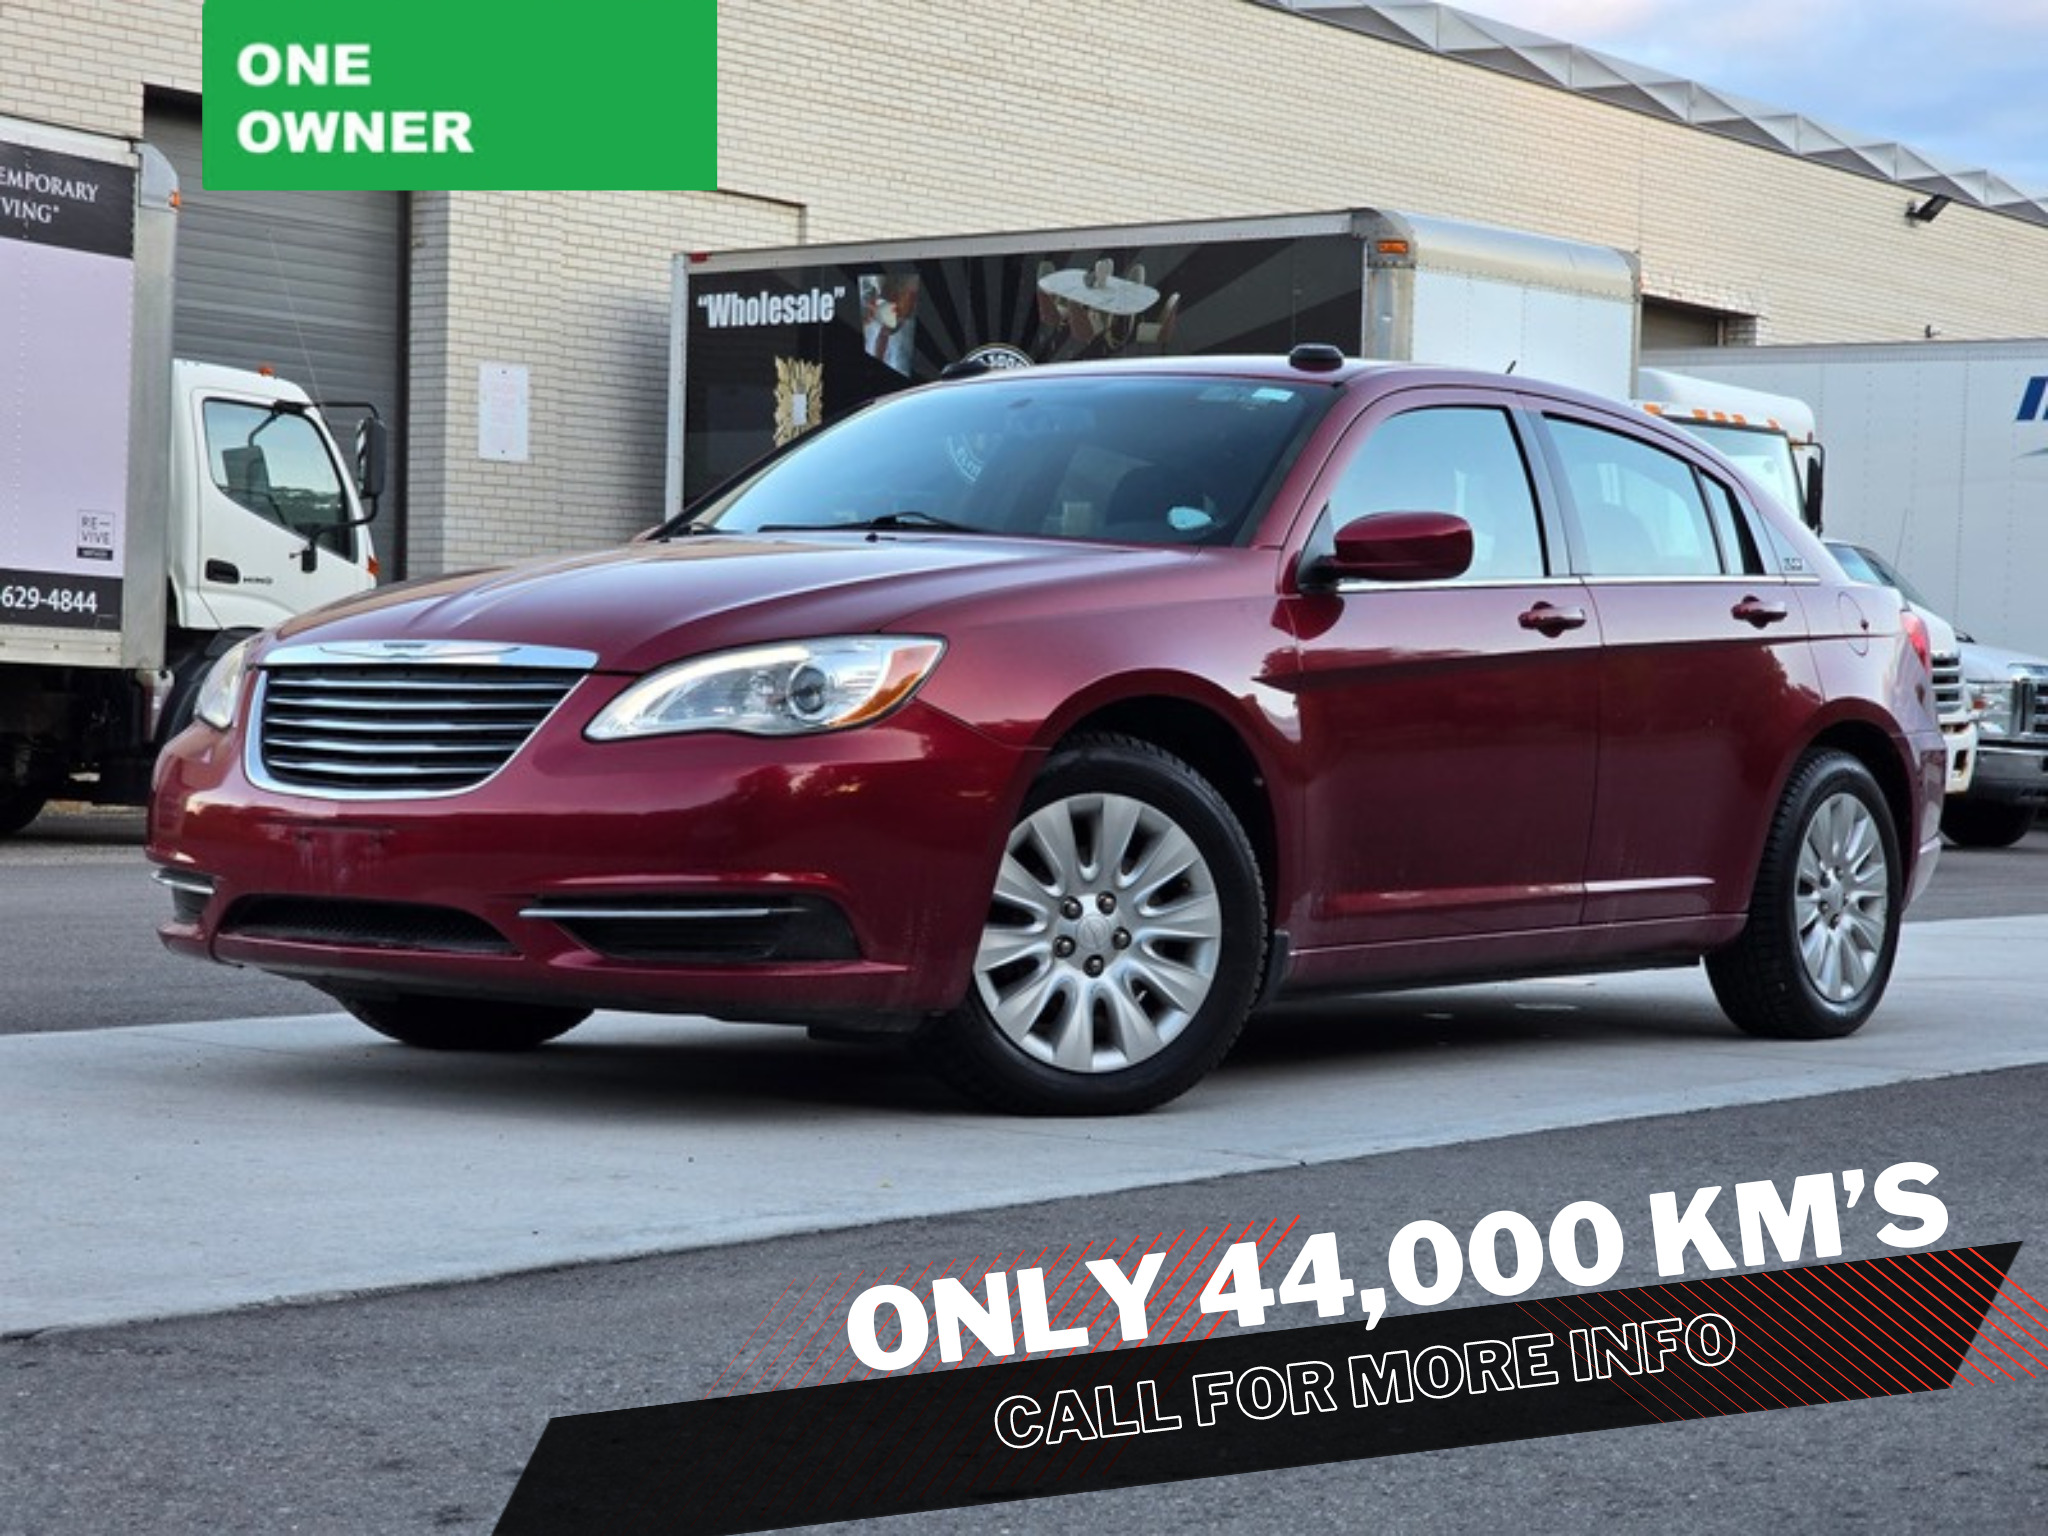 2012 Chrysler 200 ONE owner *44,000 Km's* from the Fire Department